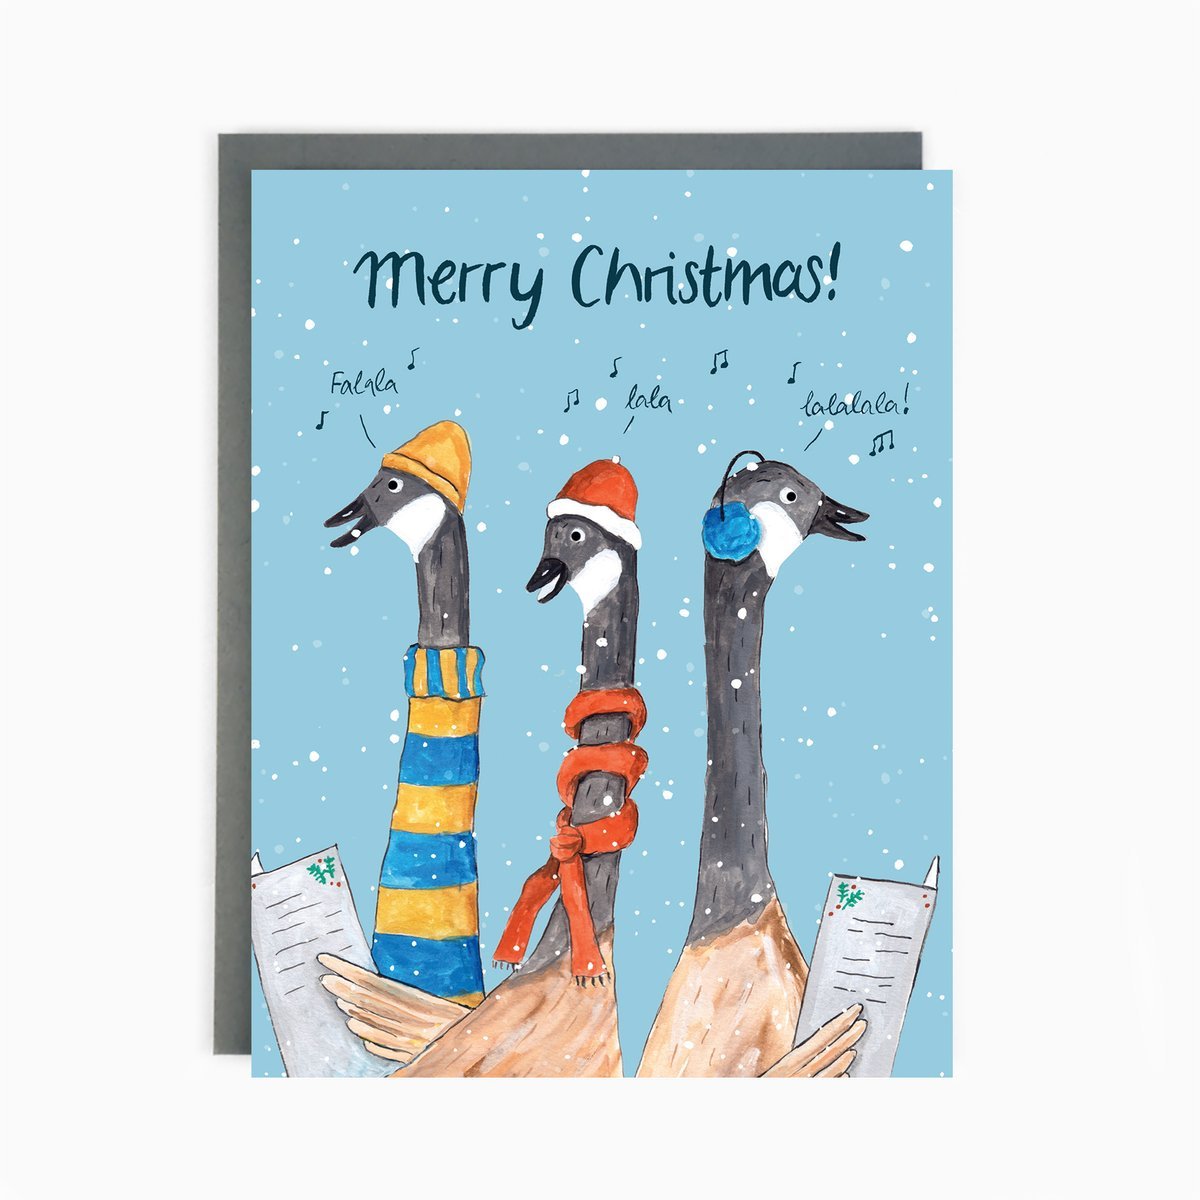 Christmas Critter Collection Boxed Cards